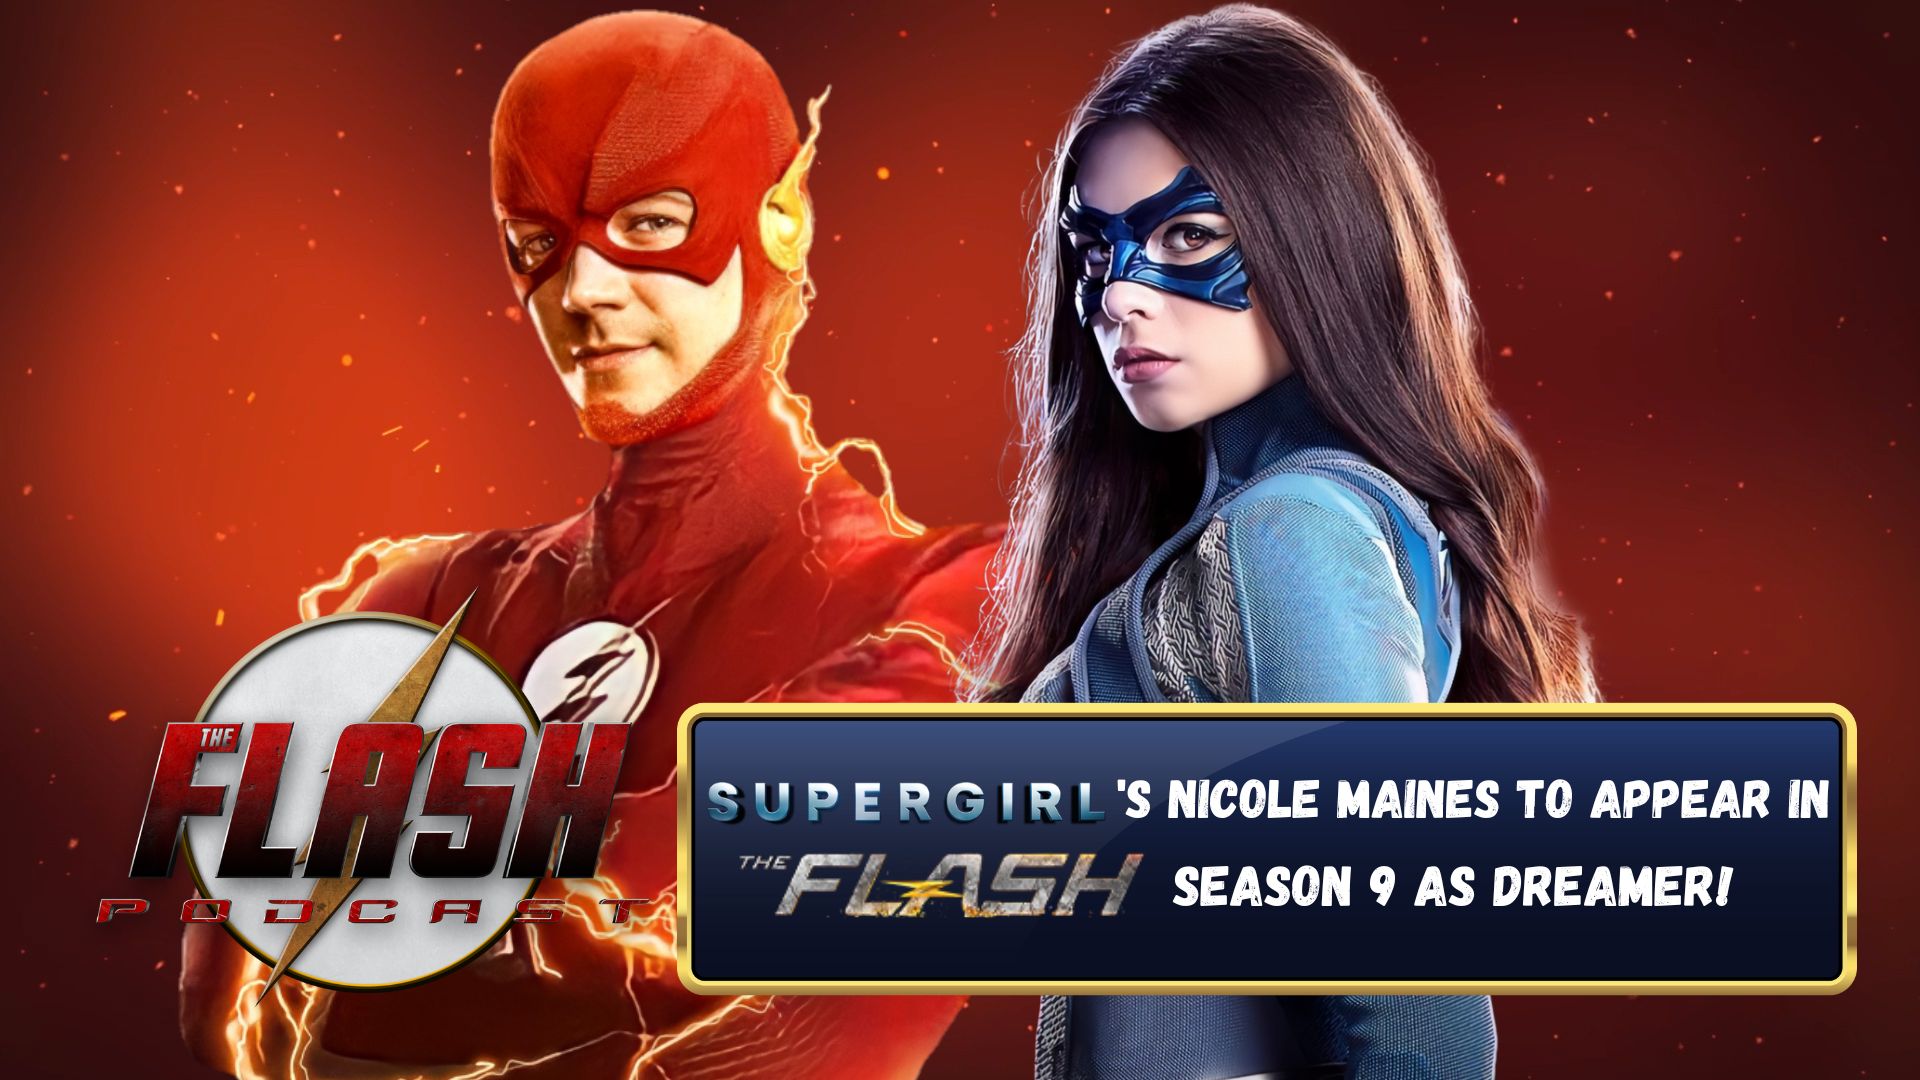 Supergirl Nicole Maines To Appear In The Flash Season 9 As Dreamer